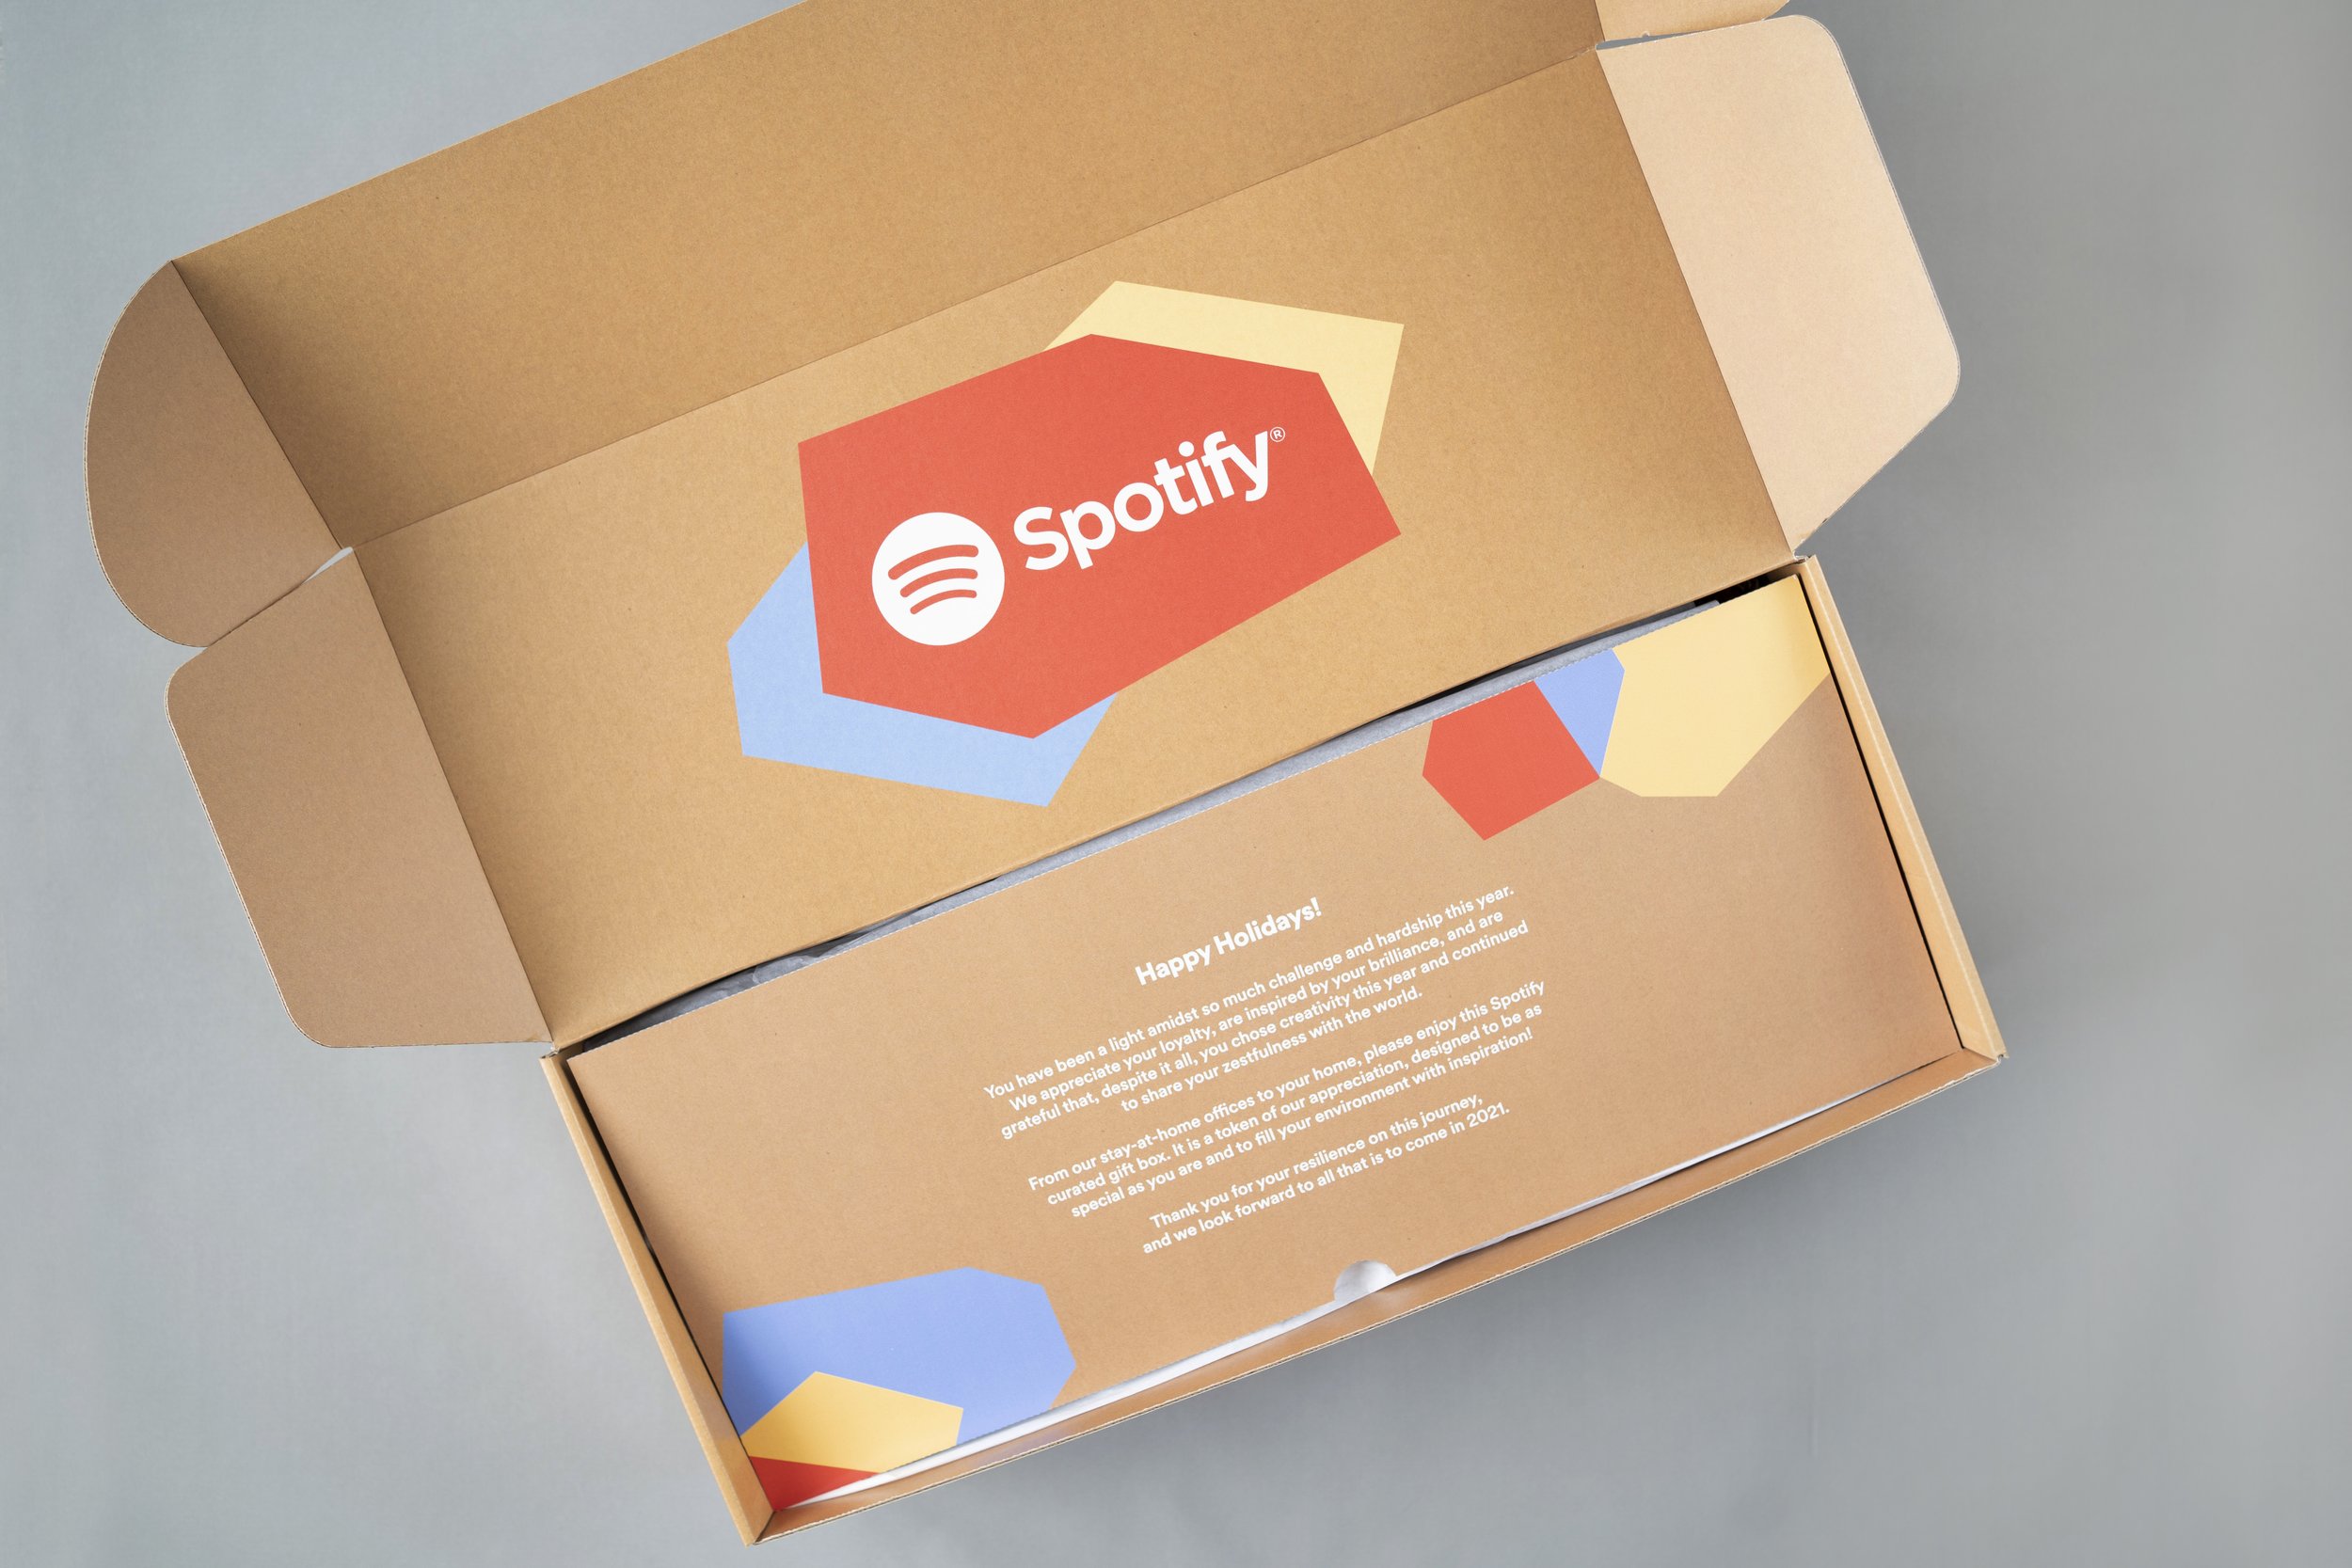 03_spotify_box_contents_A7S01928.jpg